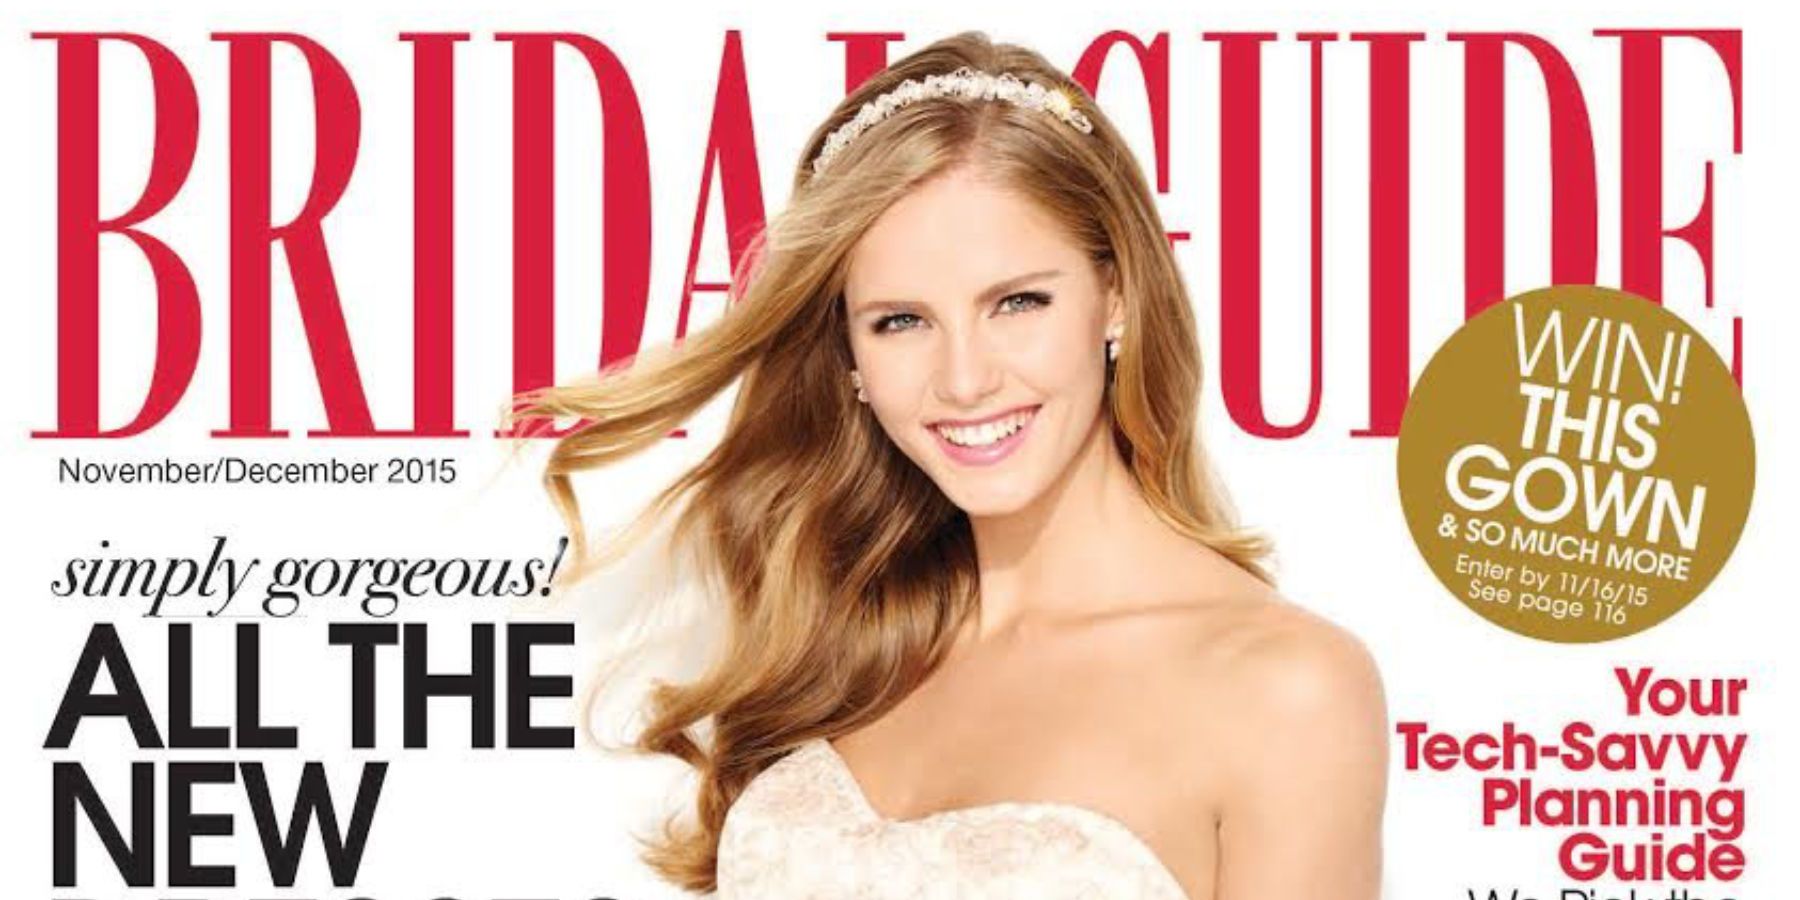 The cover of the bridal guide magazine. A beautiful young bride smiling is the cover of the December 2015 issue.